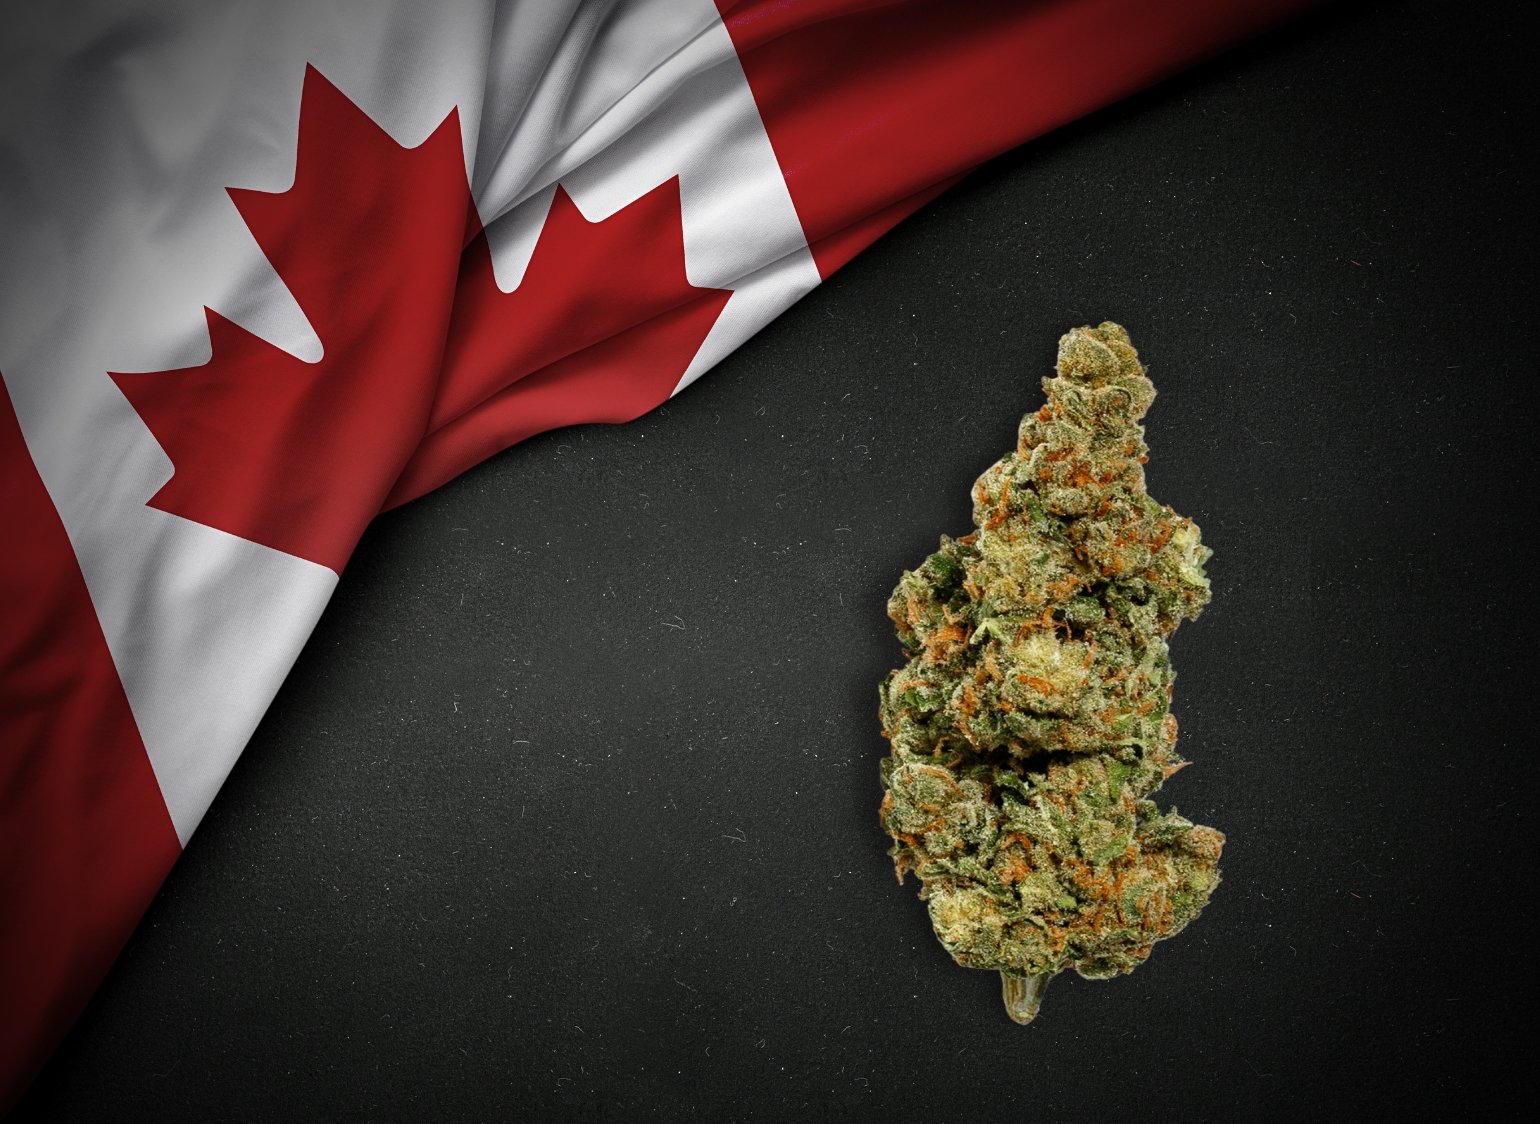 6 Iconic Moments in Cannabis History in Canada